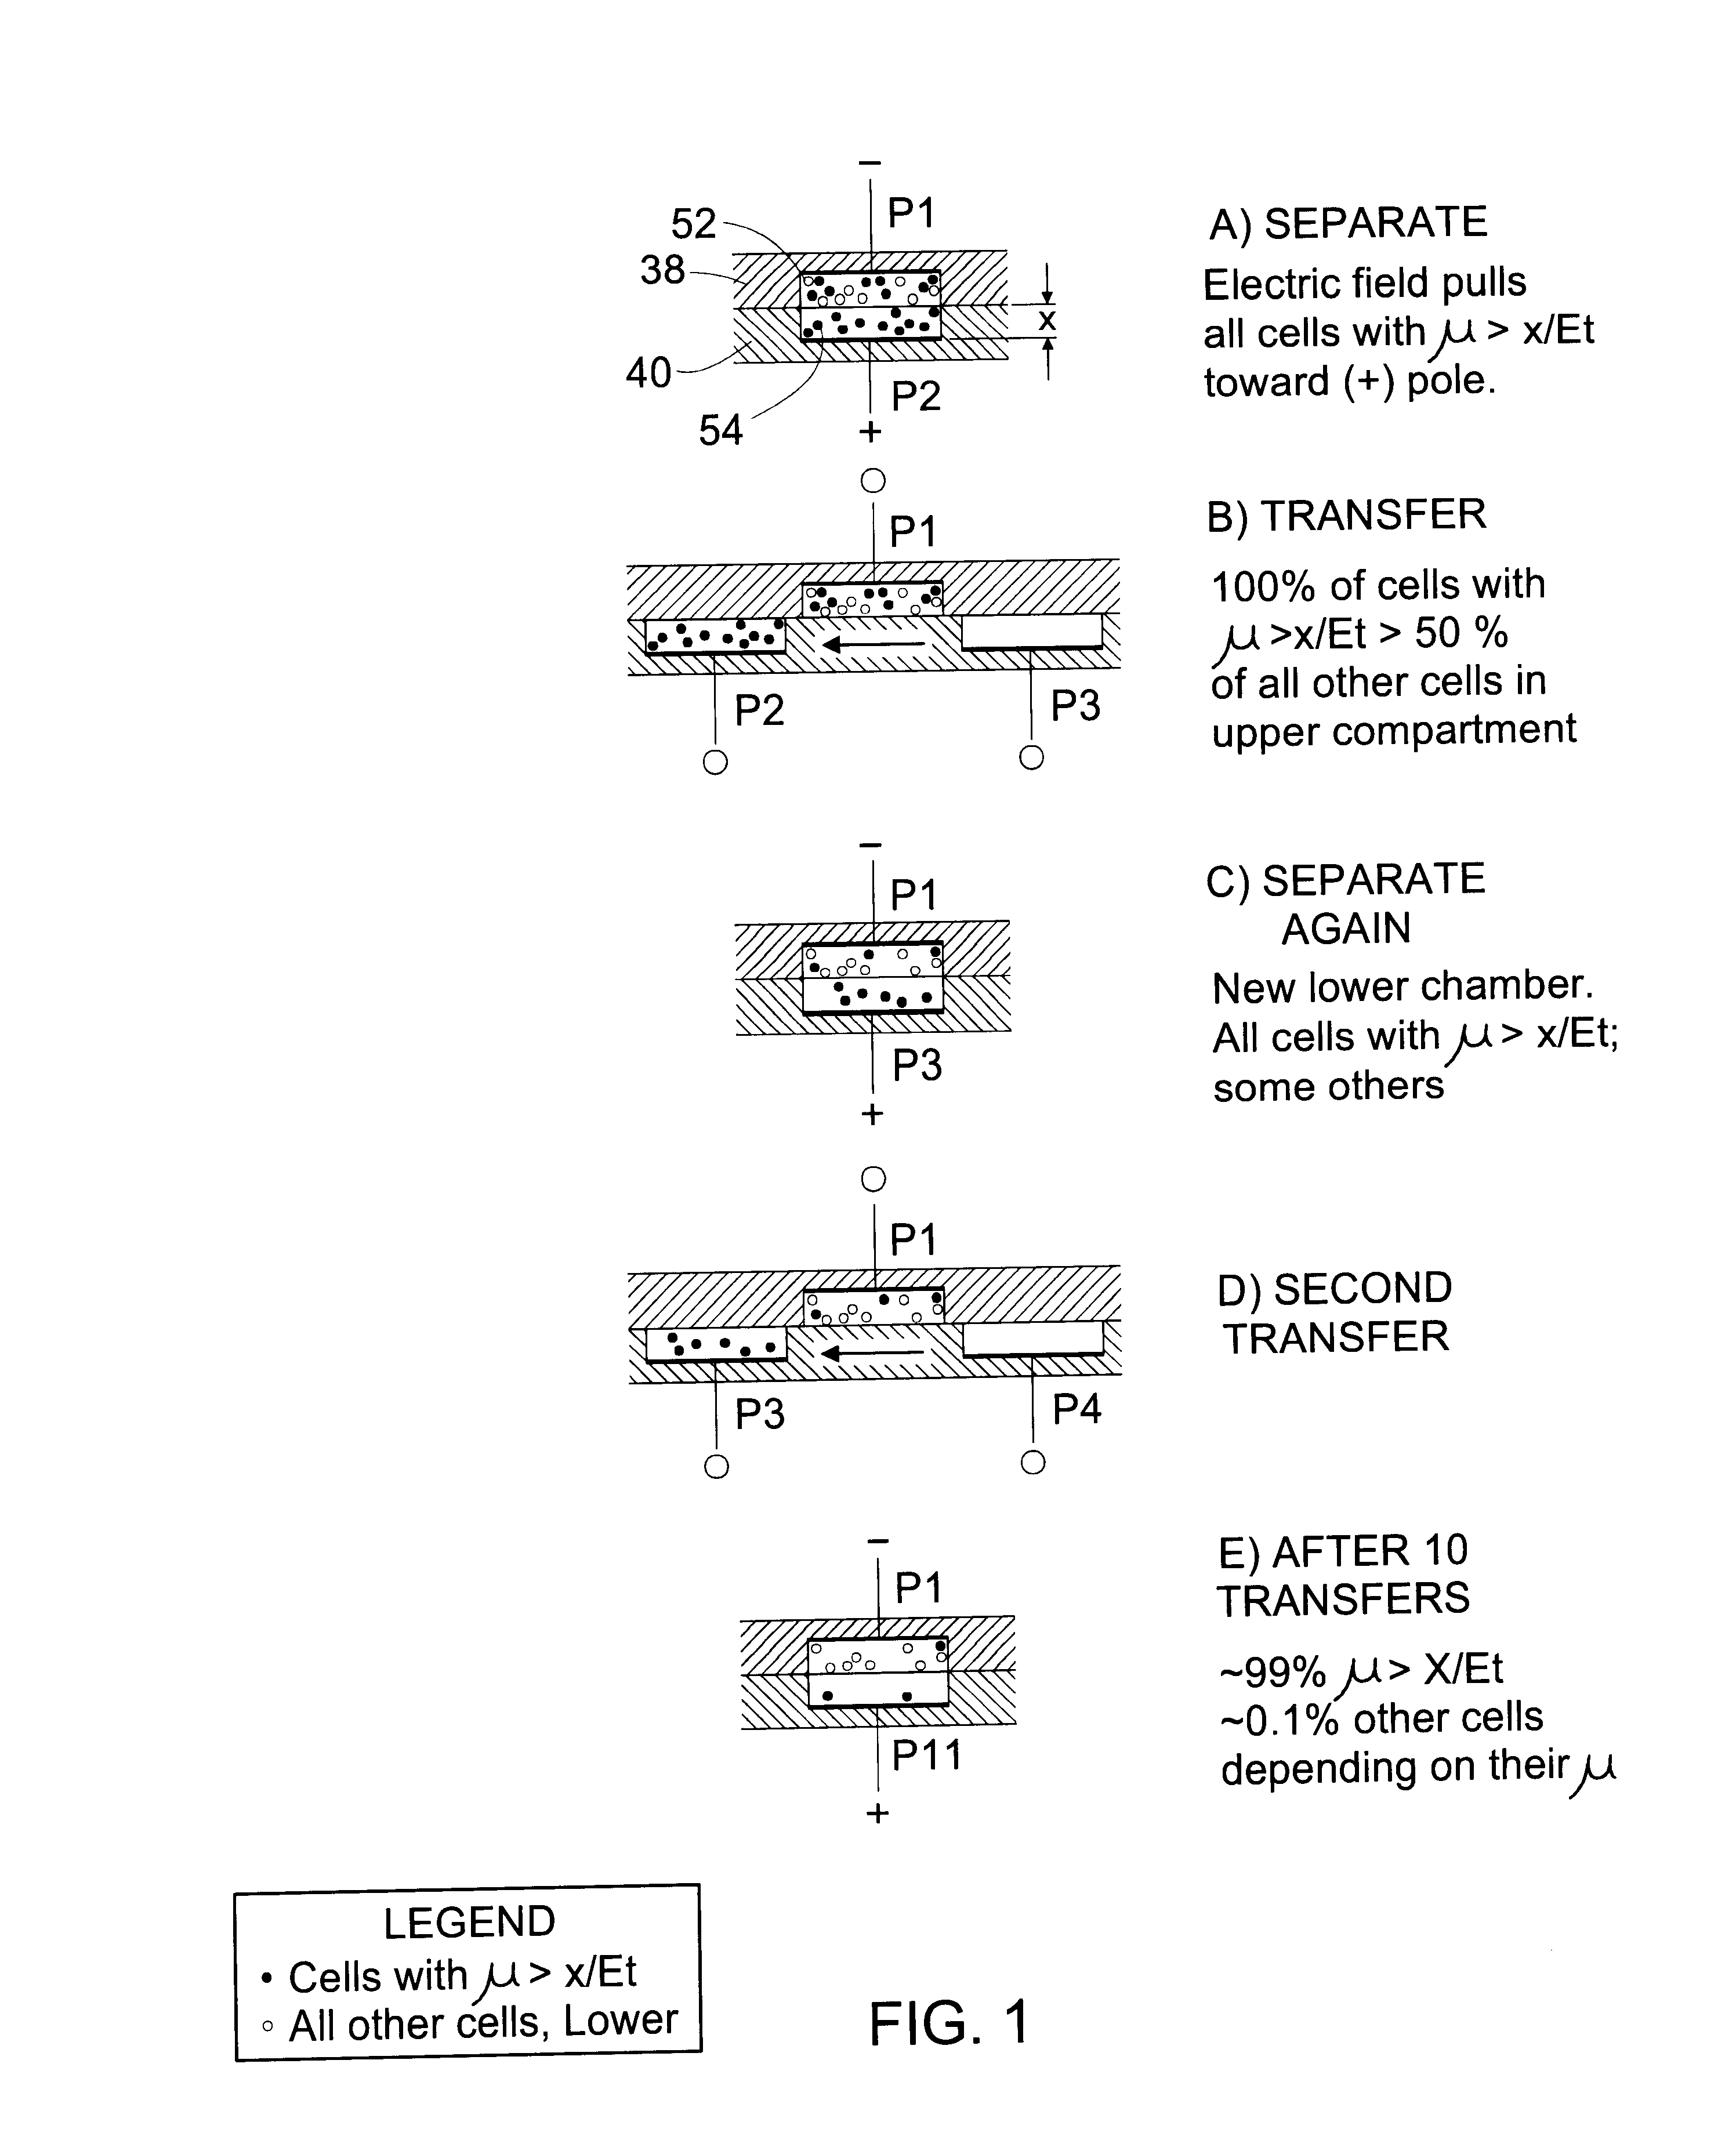 Multistage electrophoresis apparatus and method of use for the separation and purification of cells, particles and solutes